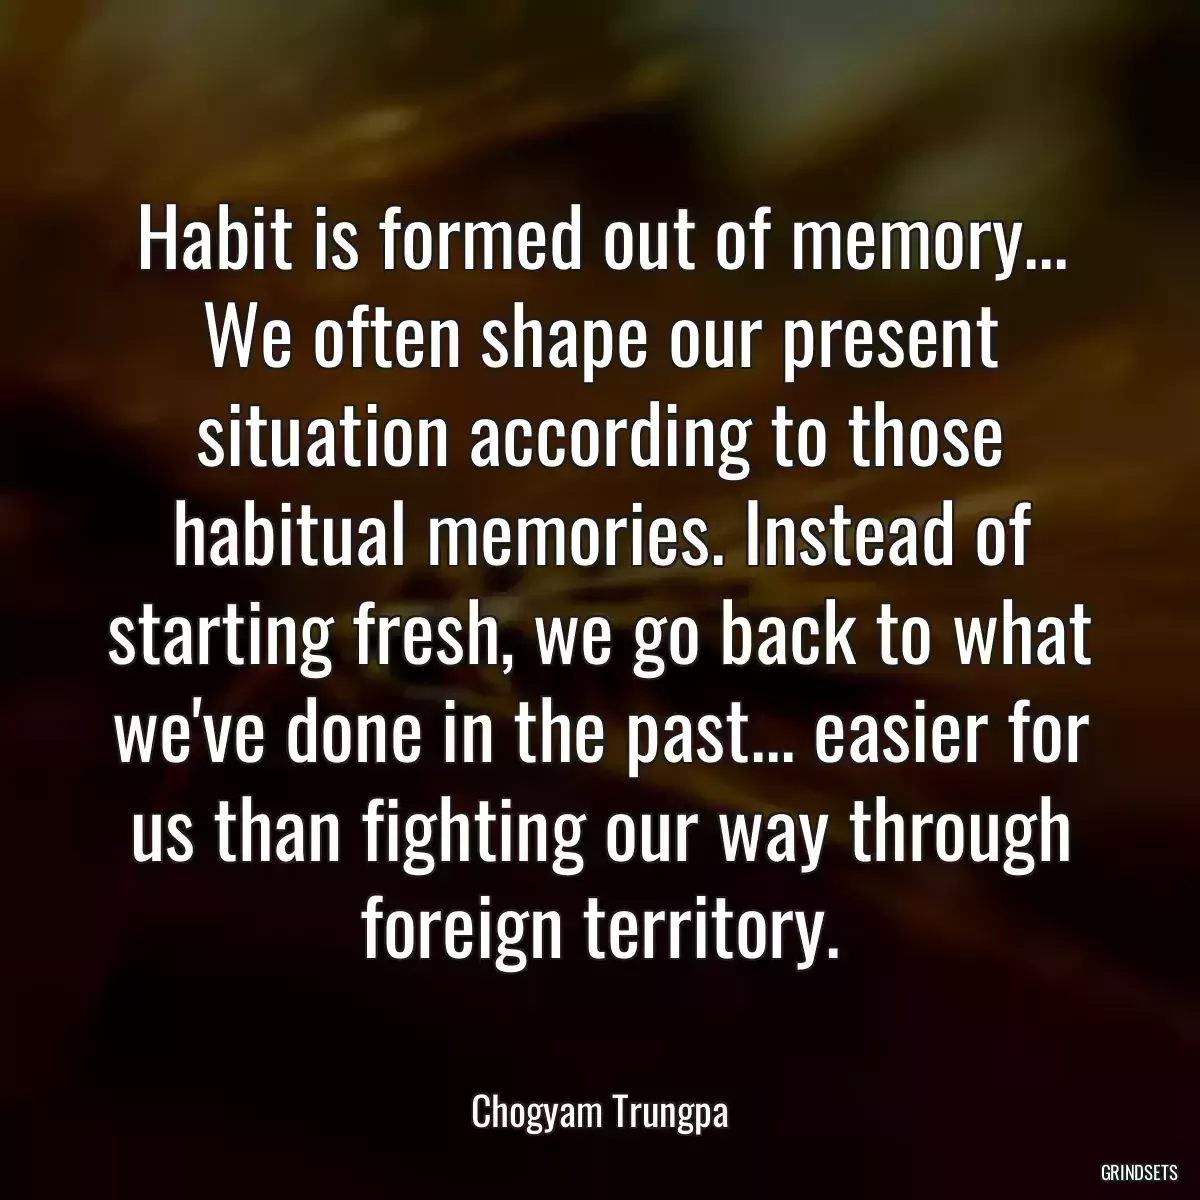 Habit is formed out of memory... We often shape our present situation according to those habitual memories. Instead of starting fresh, we go back to what we\'ve done in the past... easier for us than fighting our way through foreign territory.